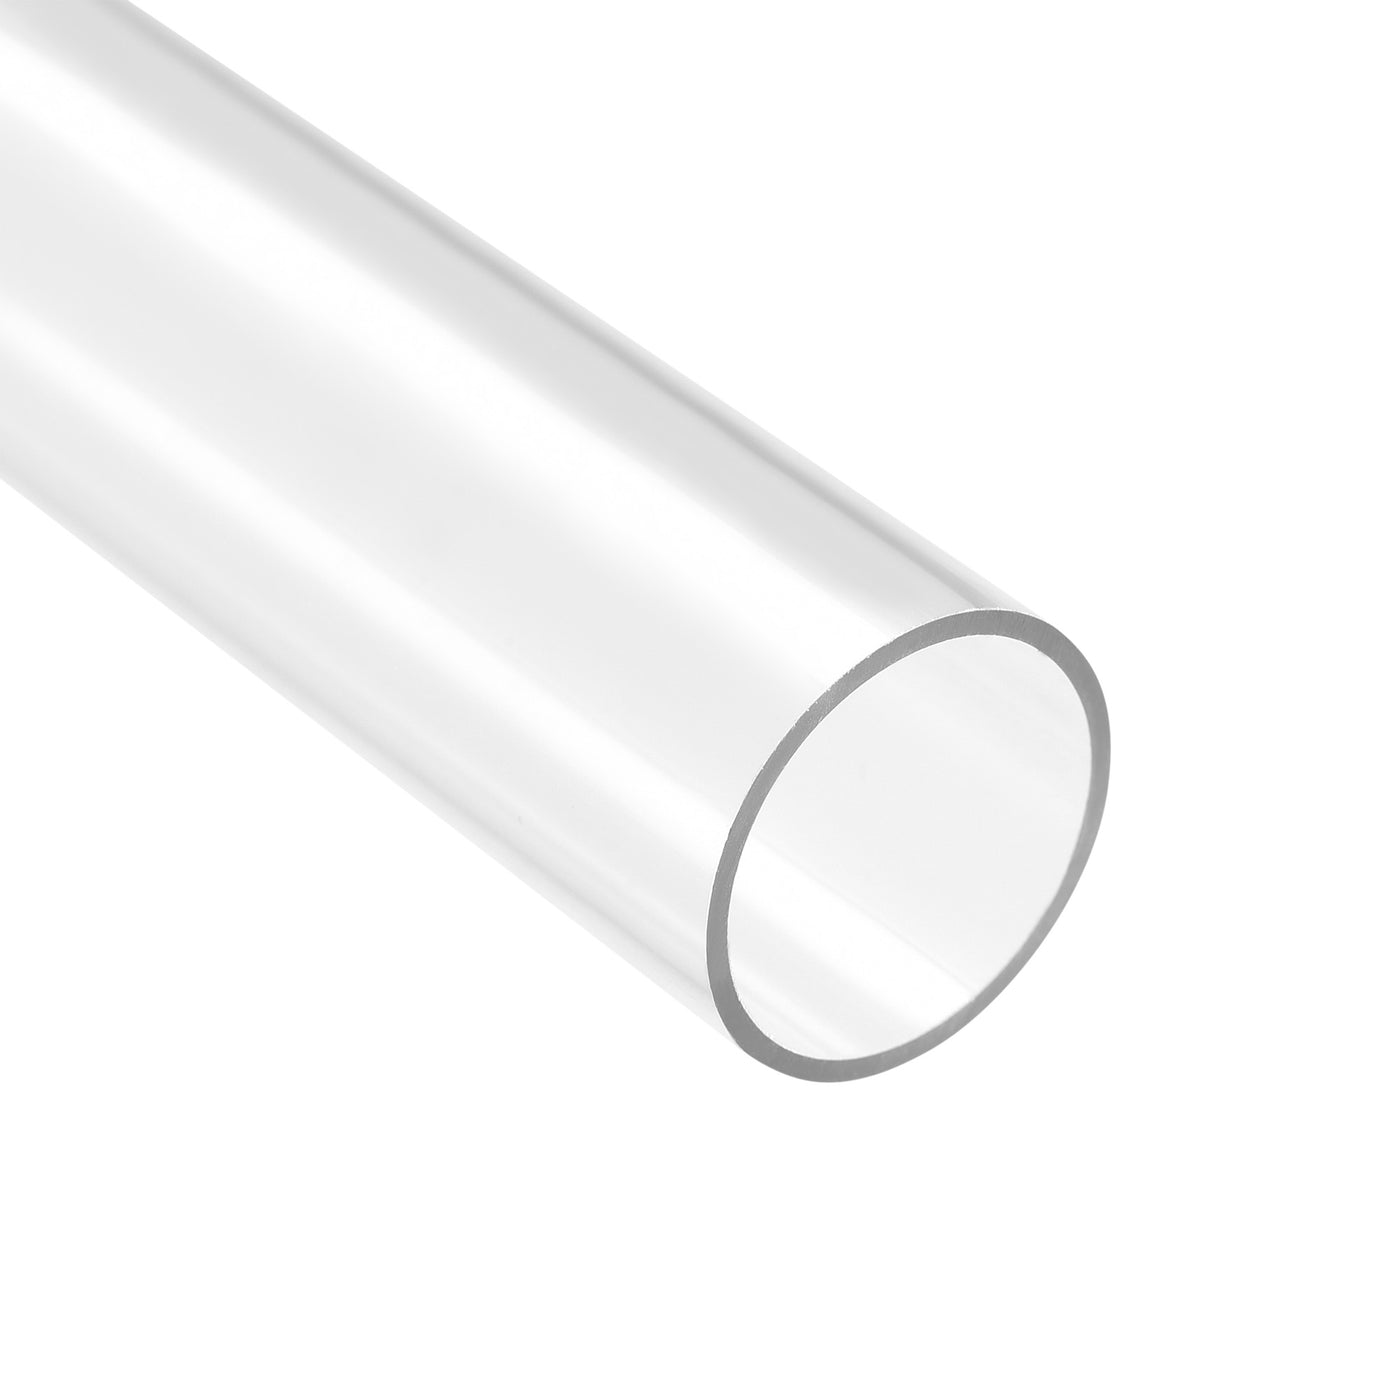 Uxcell Uxcell Polycarbonate Rigid Round Clear Tubing 6mm(0.23 Inch)IDx8mm(0.31 Inch)ODx200mm(7.87 Inch) Length Plastic Storage Transparent Tube with Black Lids 2pcs